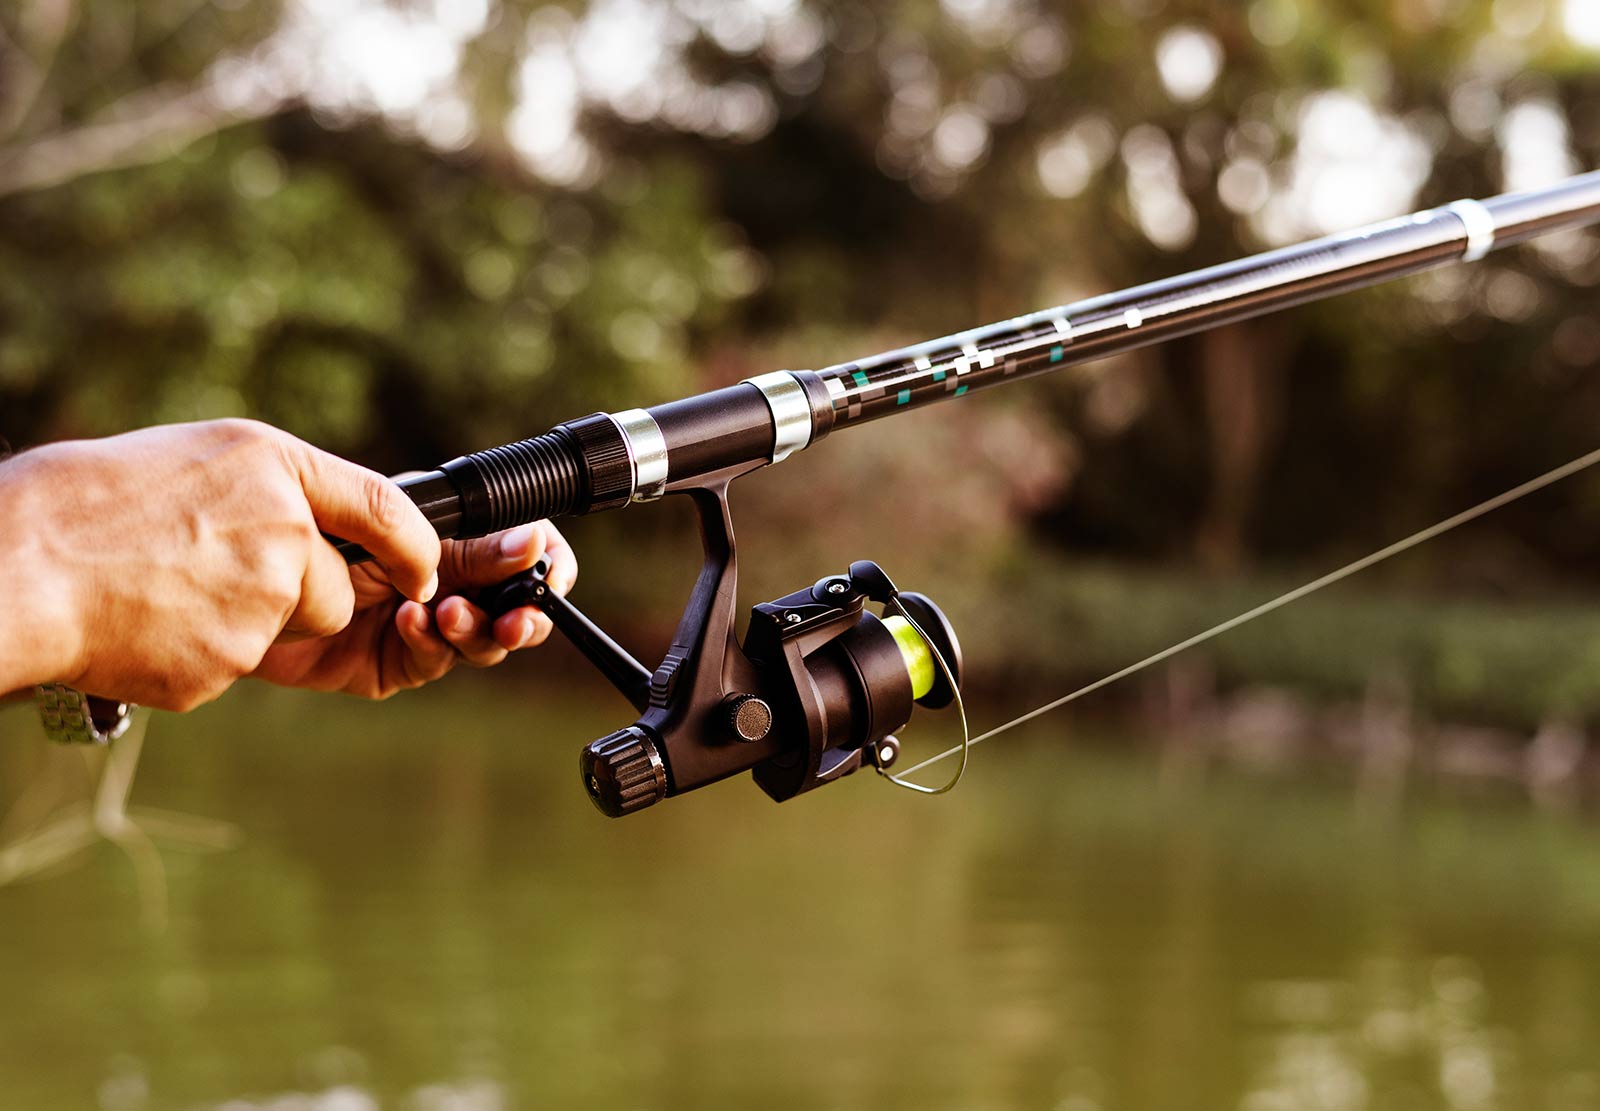 10 Best Bass Spinning Reels 2021: Tips To Choose The Best Spinning Reel For You